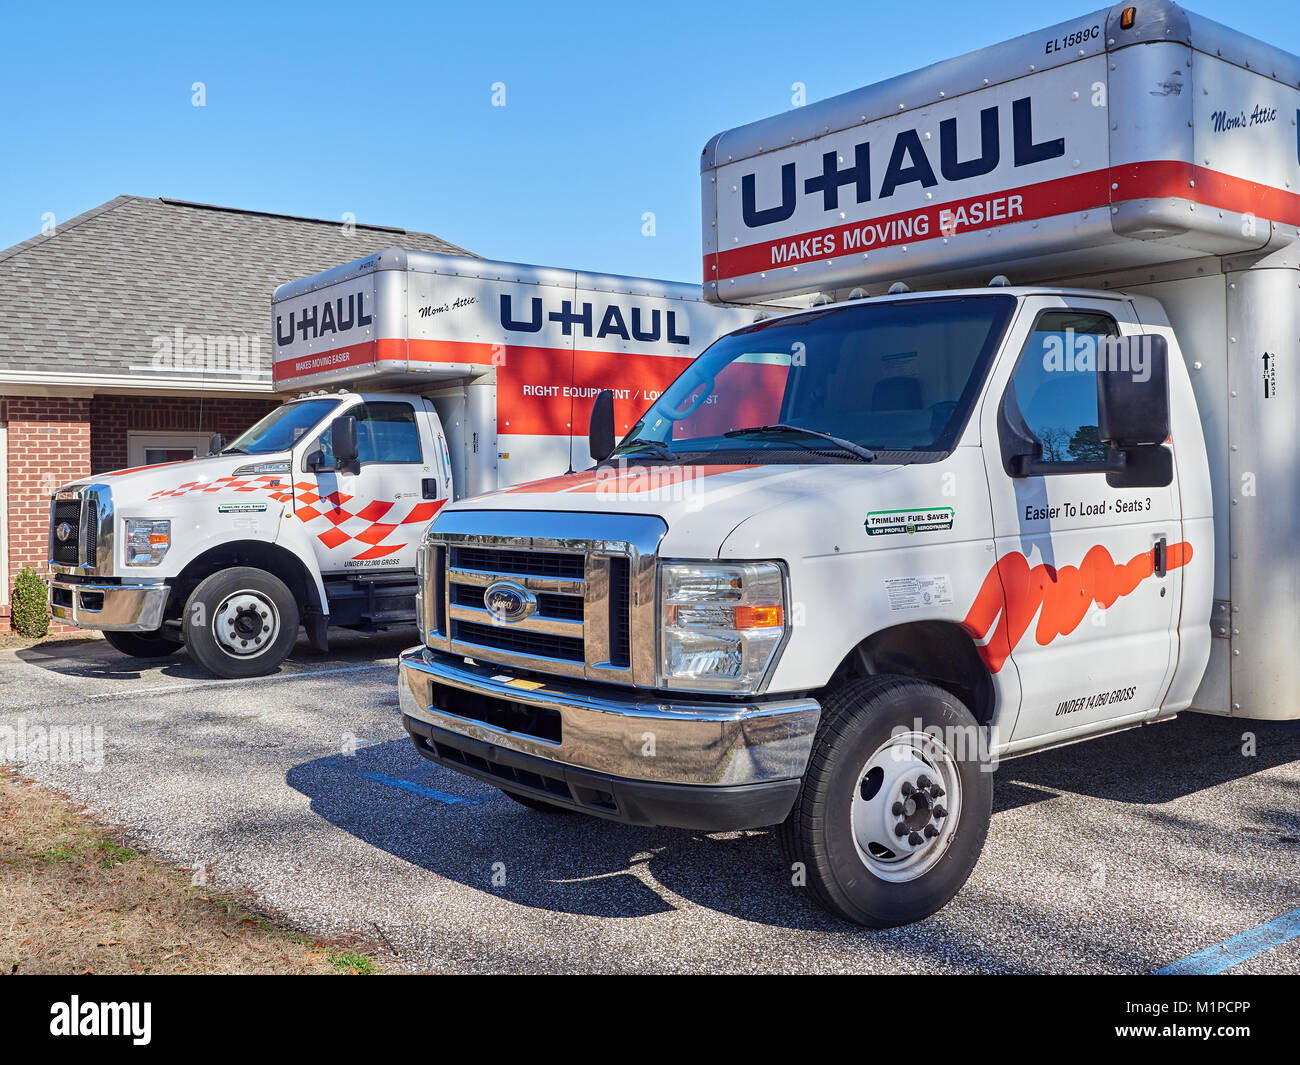 Two Uhaul self moving trucks or vans parked and ready for rental at a Uhaul and storage facility in Montgomery Alabama, United States. Stock Photo